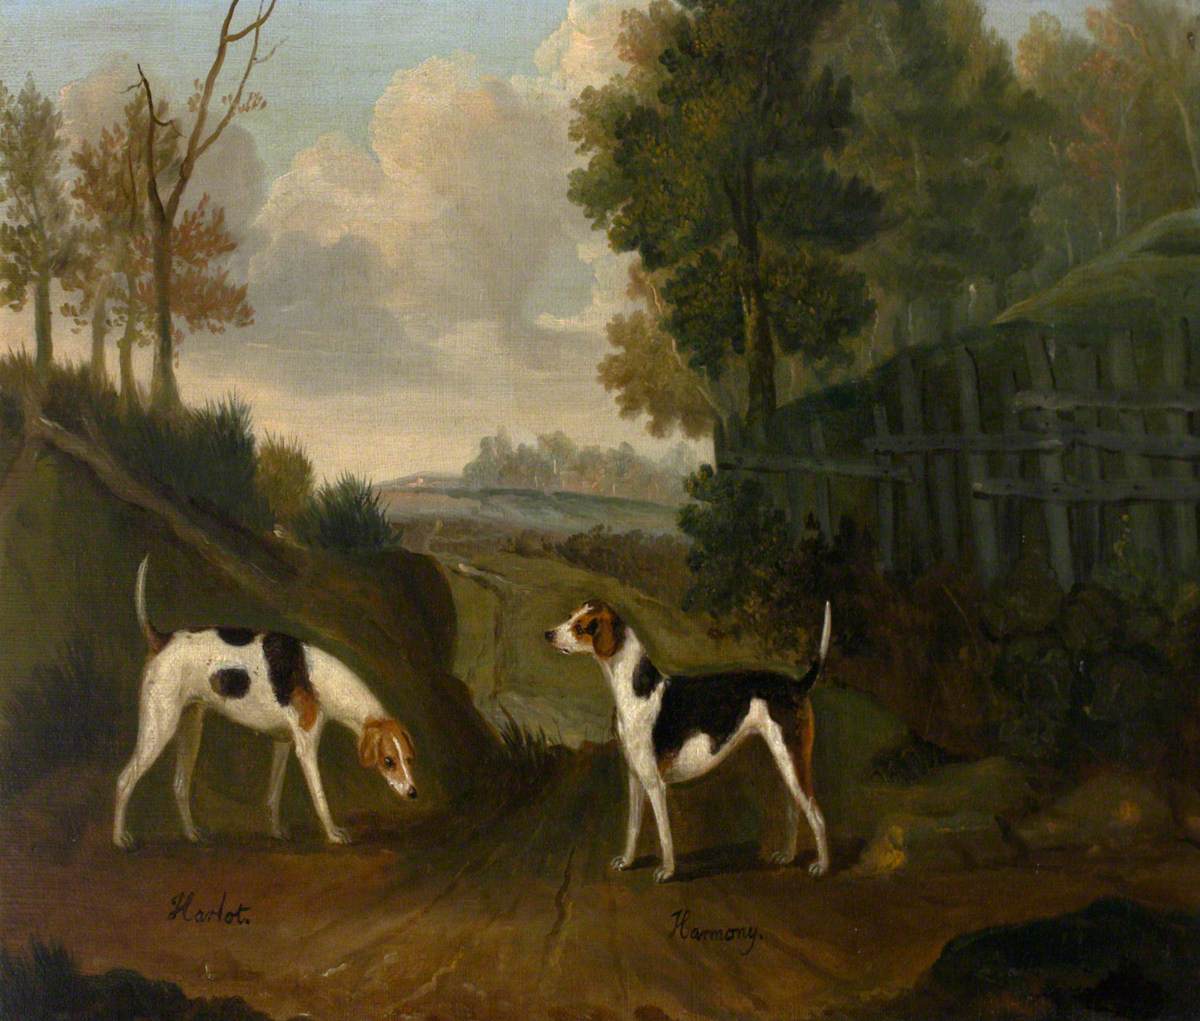 'Harlot' and 'Harmony', a Pair of Hounds